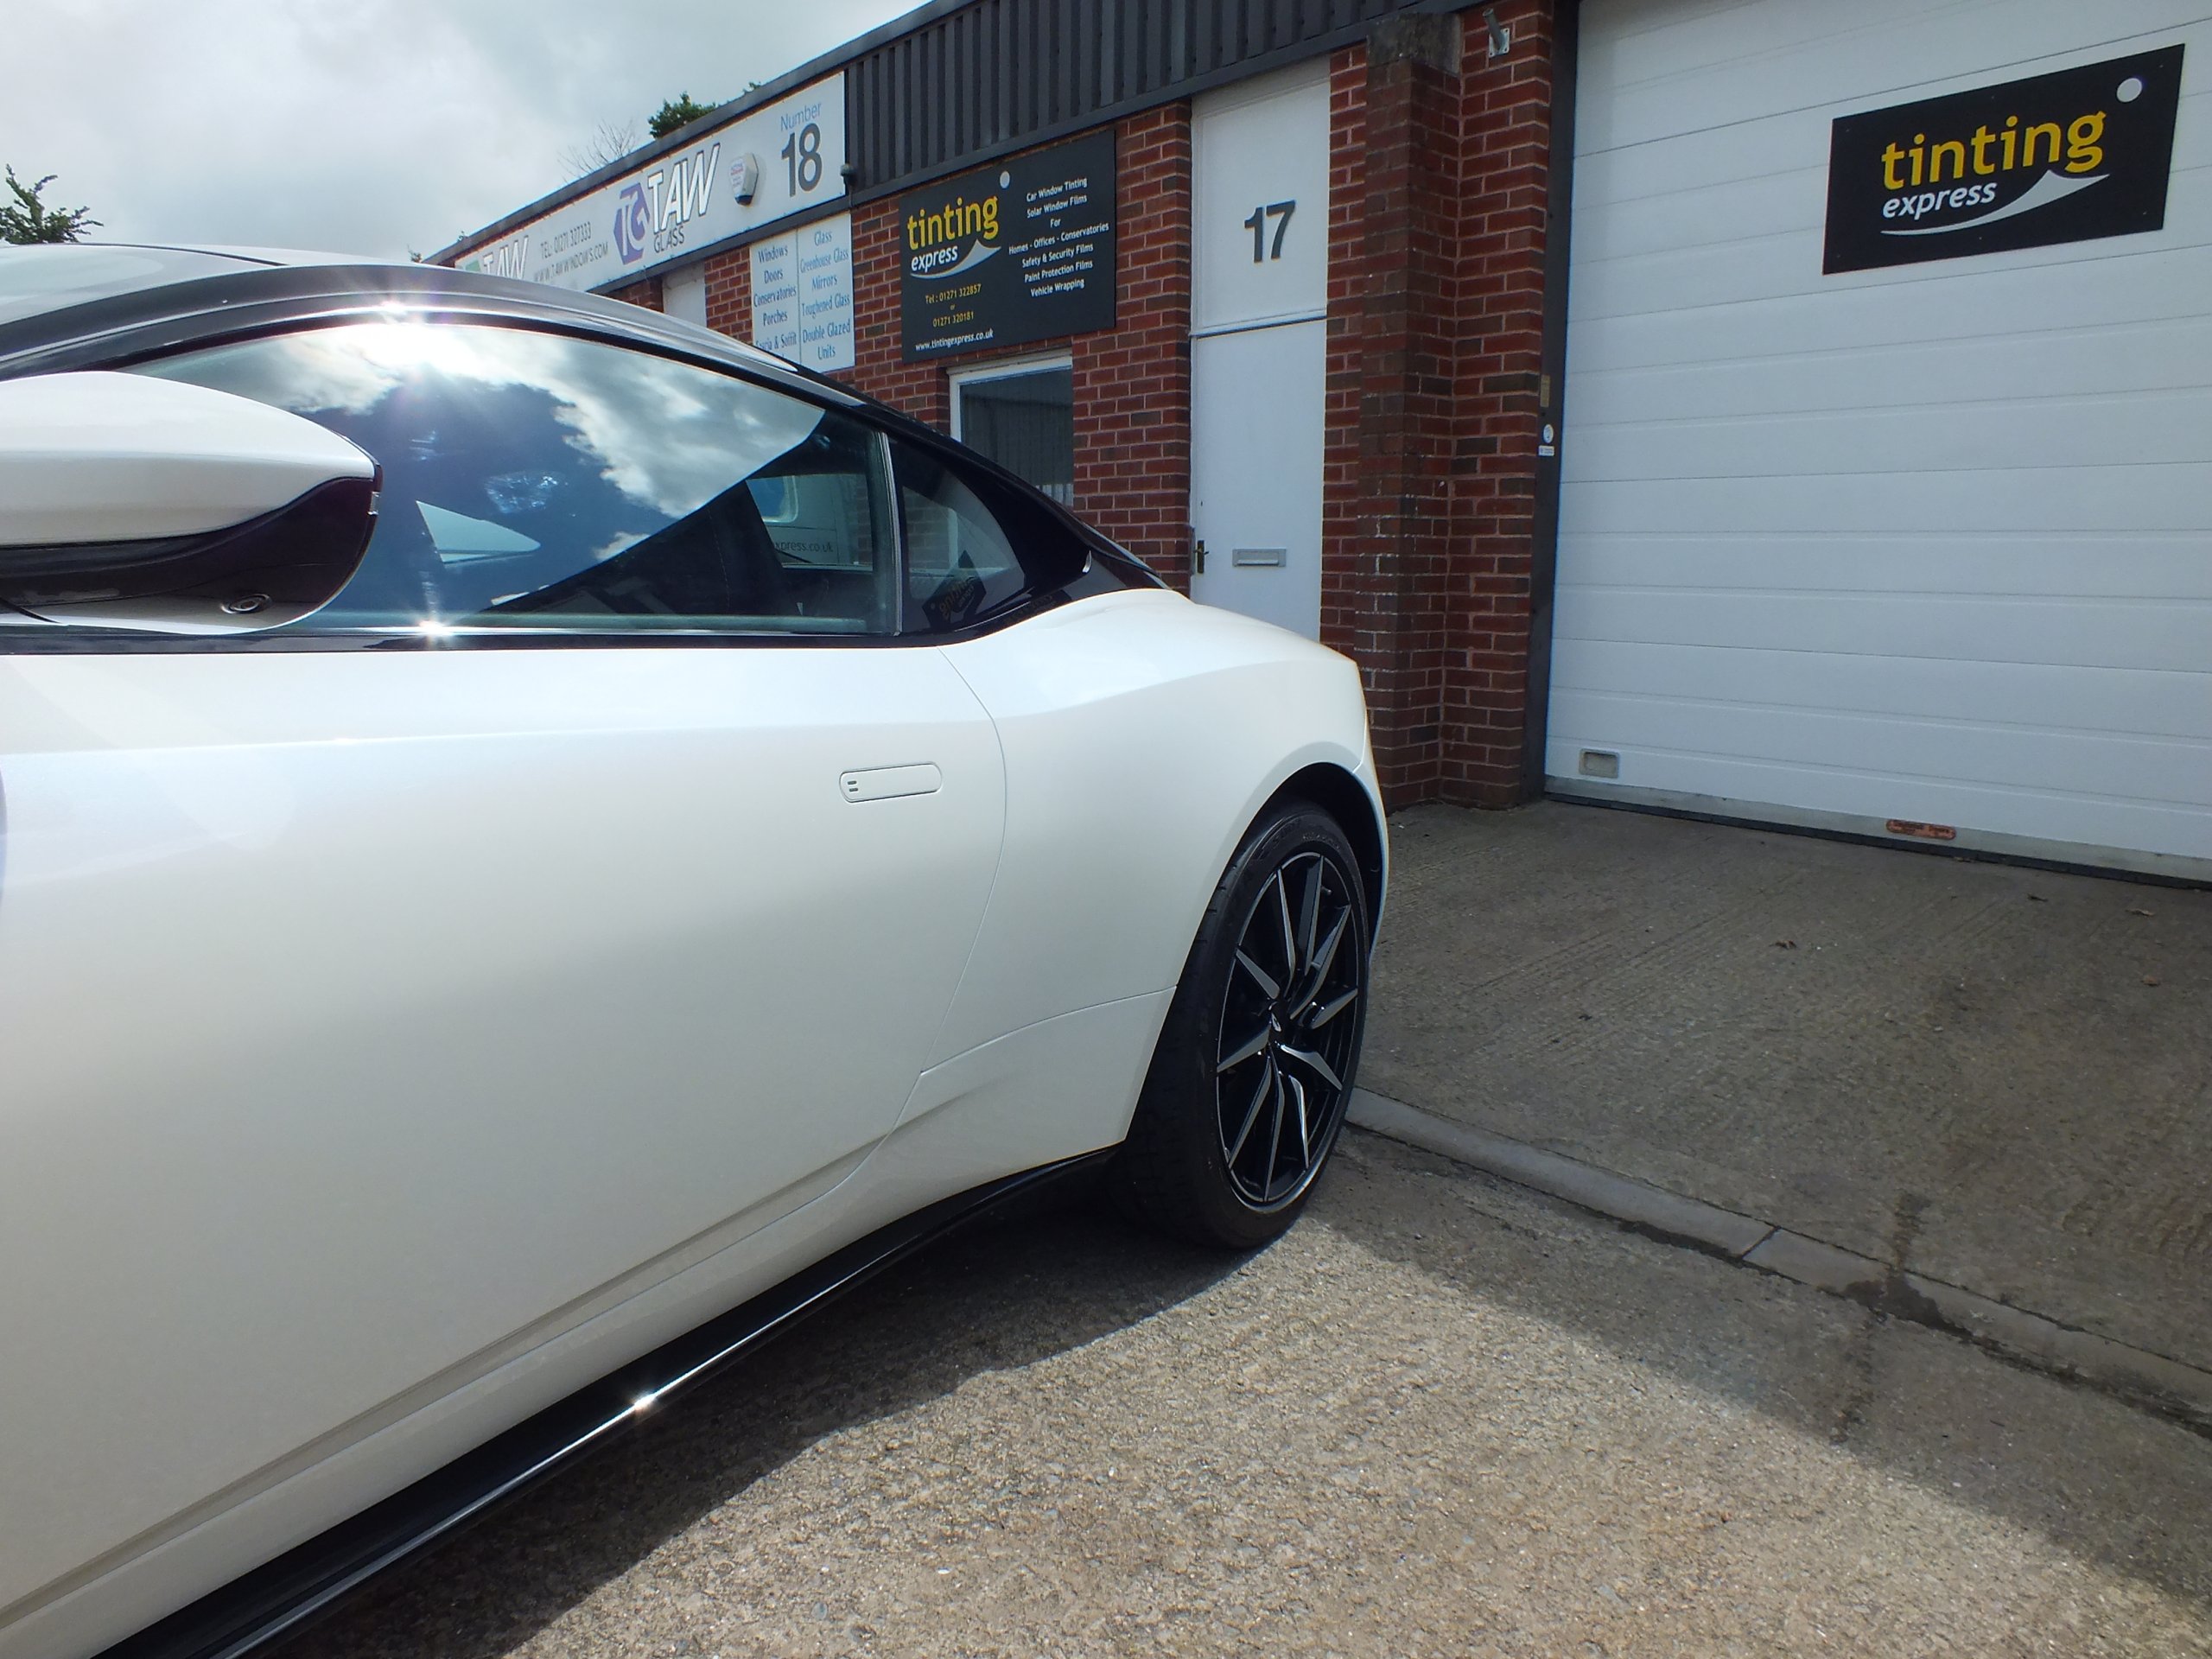 Paint Protection Film application completed on this Aston Martin DB11 by Tinting Express Ltd